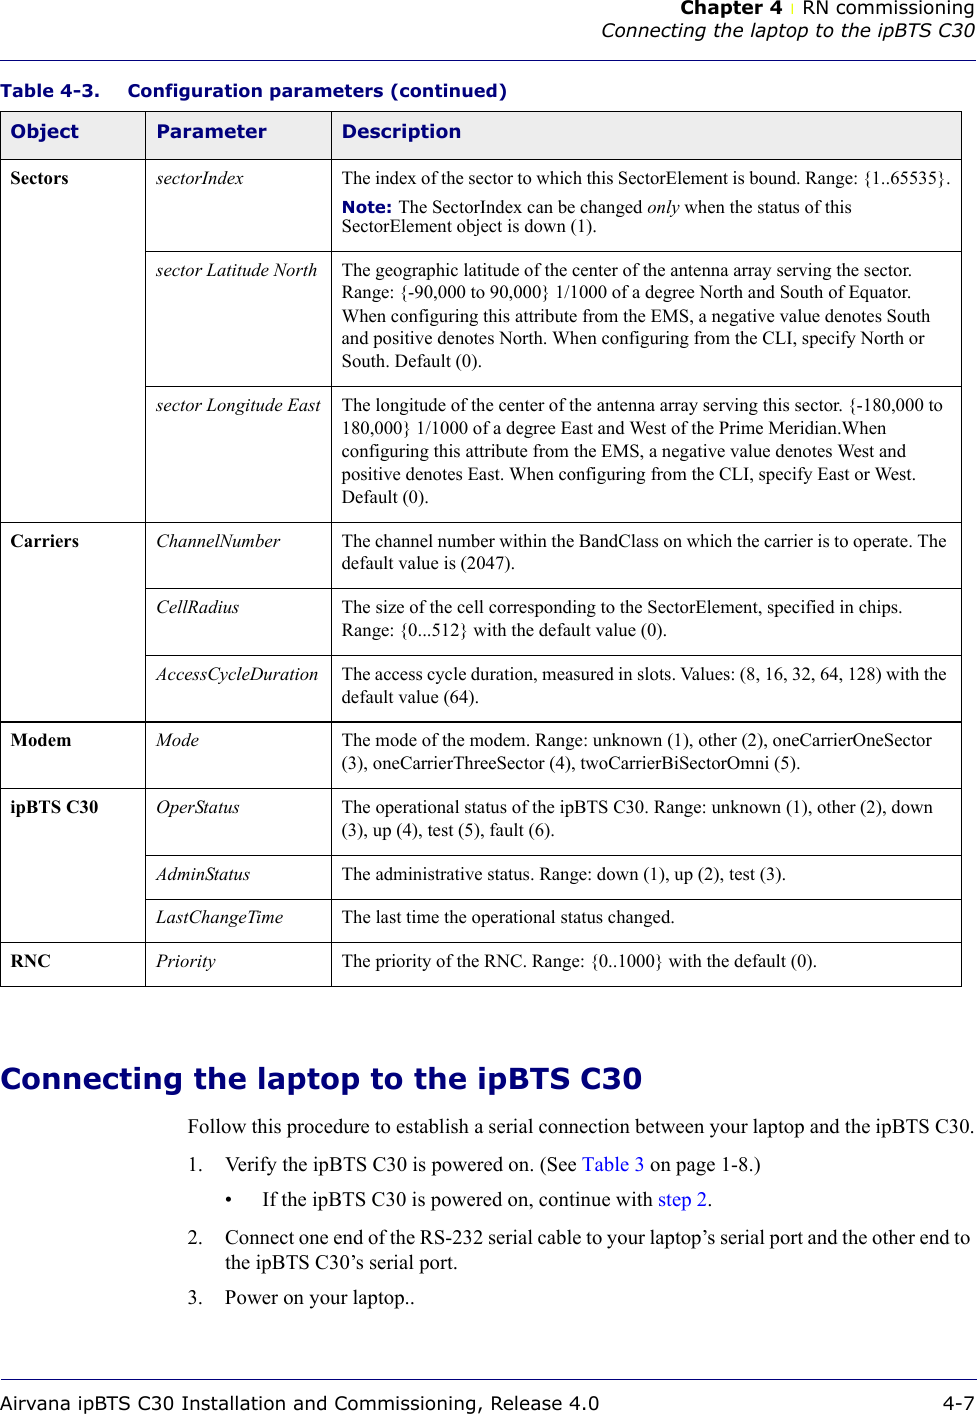 Chapter 4 lRN commissioningConnecting the laptop to the ipBTS C30Airvana ipBTS C30 Installation and Commissioning, Release 4.0 4-7Connecting the laptop to the ipBTS C30Follow this procedure to establish a serial connection between your laptop and the ipBTS C30.1. Verify the ipBTS C30 is powered on. (See Table 3 on page 1-8.)• If the ipBTS C30 is powered on, continue with step 2.2. Connect one end of the RS-232 serial cable to your laptop’s serial port and the other end to the ipBTS C30’s serial port.3. Power on your laptop..Sectors sectorIndex The index of the sector to which this SectorElement is bound. Range: {1..65535}.Note: The SectorIndex can be changed only when the status of this SectorElement object is down (1).sector Latitude North The geographic latitude of the center of the antenna array serving the sector. Range: {-90,000 to 90,000} 1/1000 of a degree North and South of Equator. When configuring this attribute from the EMS, a negative value denotes South and positive denotes North. When configuring from the CLI, specify North or South. Default (0).sector Longitude East The longitude of the center of the antenna array serving this sector. {-180,000 to 180,000} 1/1000 of a degree East and West of the Prime Meridian.When configuring this attribute from the EMS, a negative value denotes West and positive denotes East. When configuring from the CLI, specify East or West. Default (0).Carriers ChannelNumber The channel number within the BandClass on which the carrier is to operate. The default value is (2047).CellRadius The size of the cell corresponding to the SectorElement, specified in chips. Range: {0...512} with the default value (0).AccessCycleDuration The access cycle duration, measured in slots. Values: (8, 16, 32, 64, 128) with the default value (64).Modem Mode The mode of the modem. Range: unknown (1), other (2), oneCarrierOneSector (3), oneCarrierThreeSector (4), twoCarrierBiSectorOmni (5).ipBTS C30 OperStatus The operational status of the ipBTS C30. Range: unknown (1), other (2), down (3), up (4), test (5), fault (6). AdminStatus The administrative status. Range: down (1), up (2), test (3).LastChangeTime The last time the operational status changed. RNC Priority The priority of the RNC. Range: {0..1000} with the default (0).Table 4-3. Configuration parameters (continued)Object Parameter Description